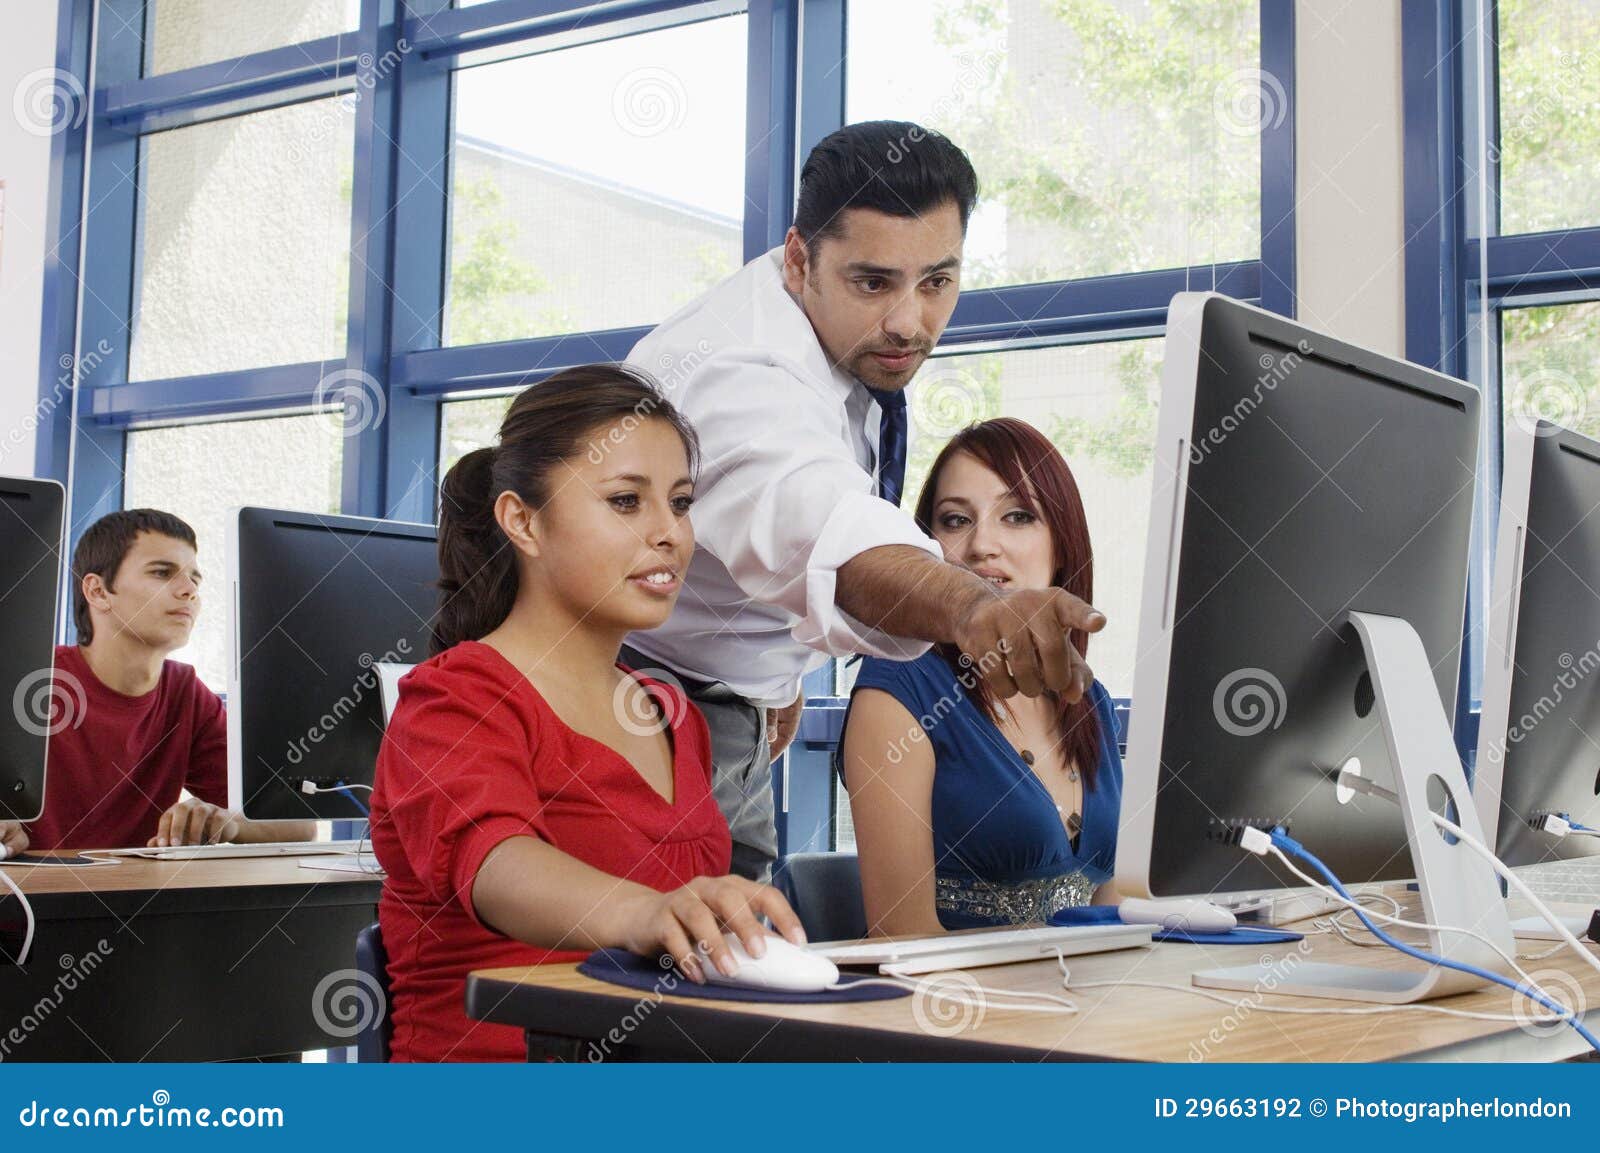 professor assisting students in class